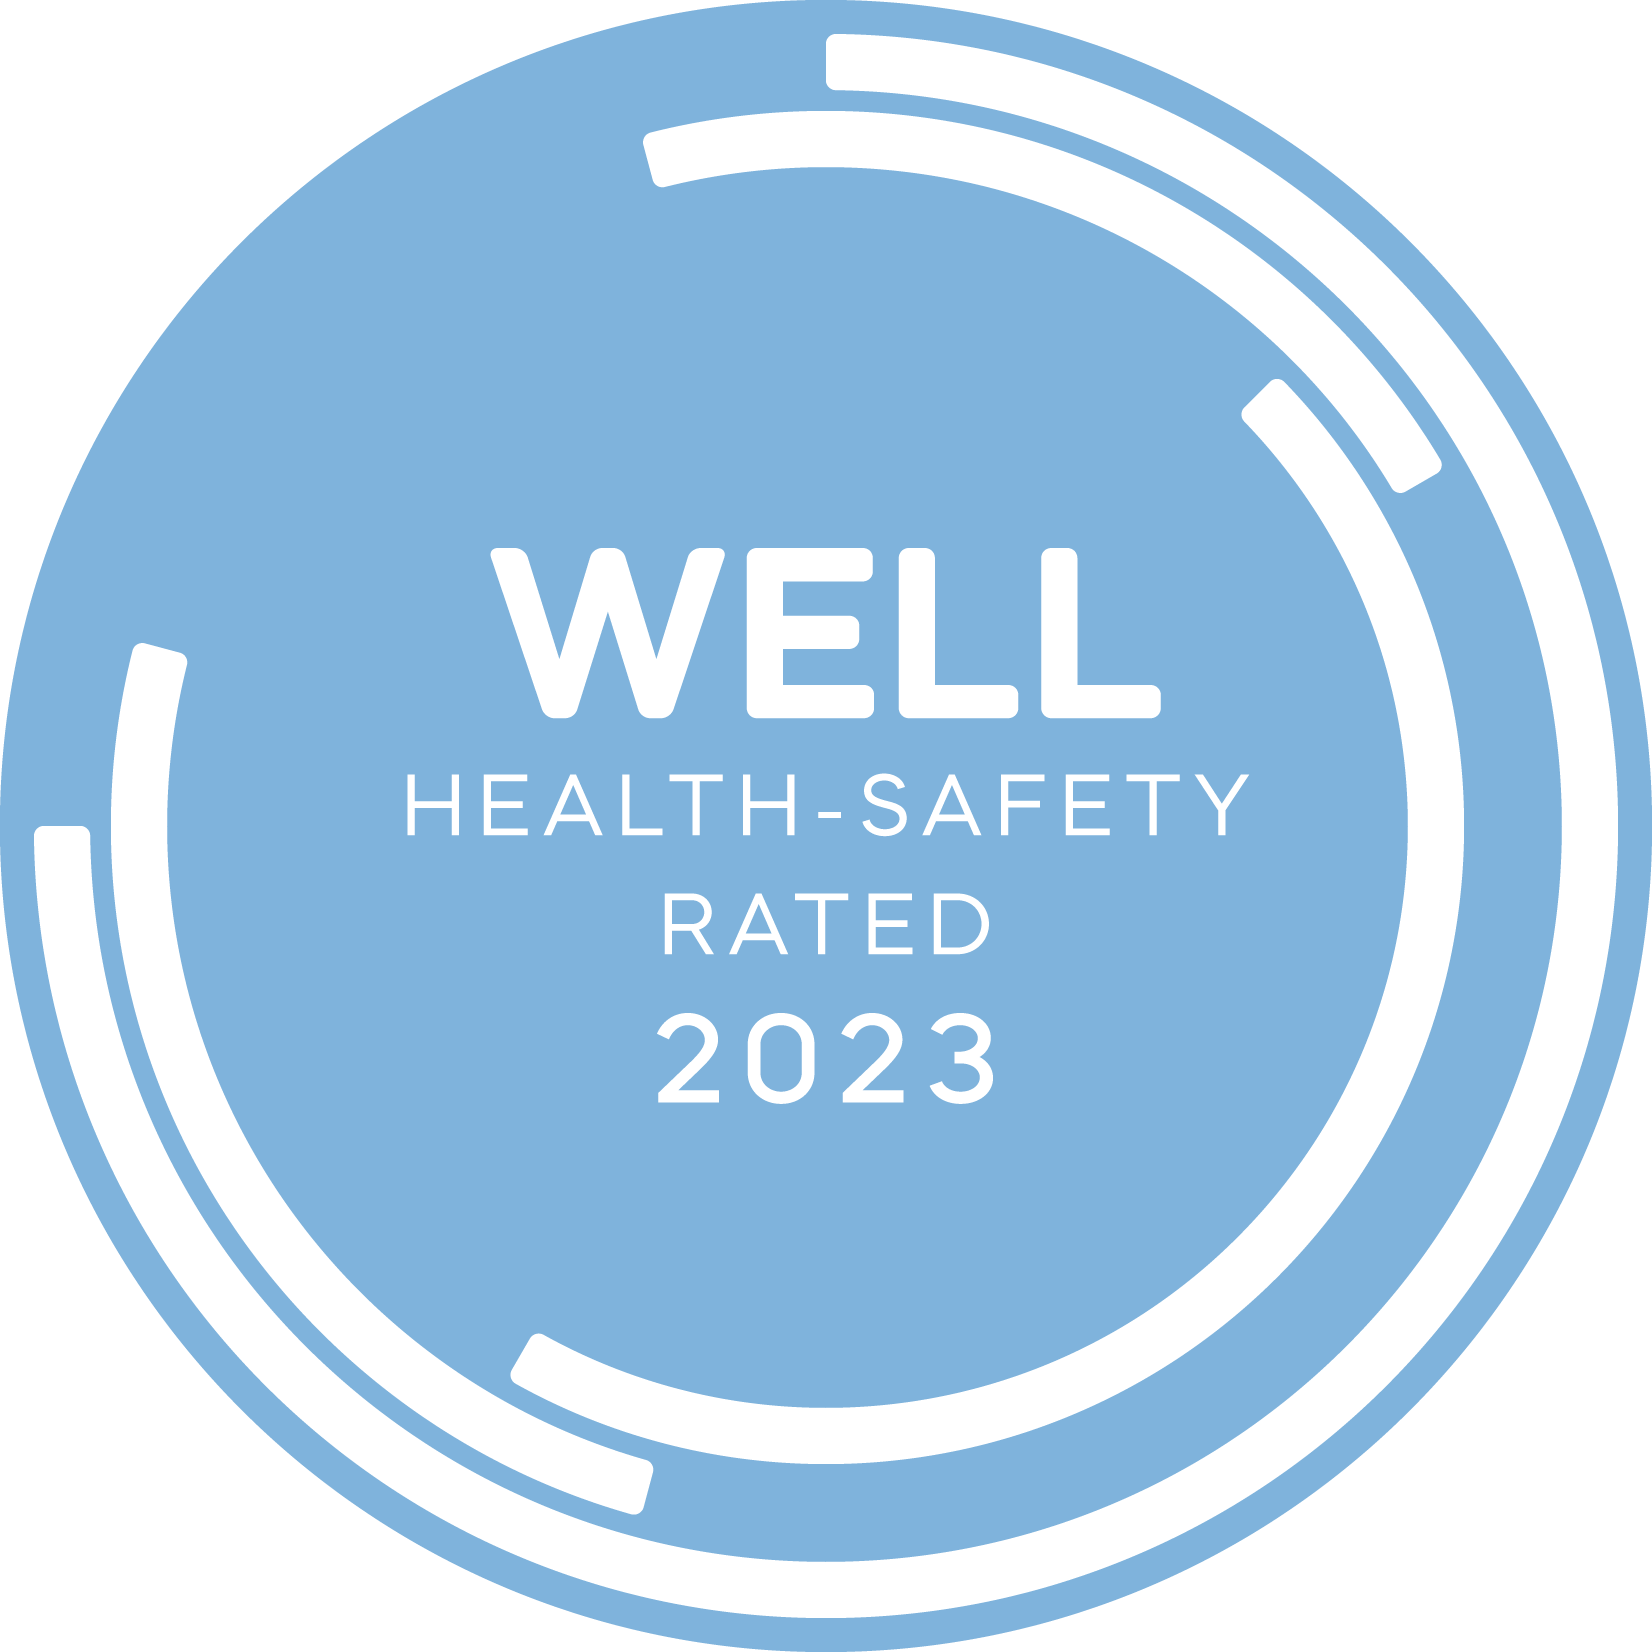 2023 WELL Health-Safey rated